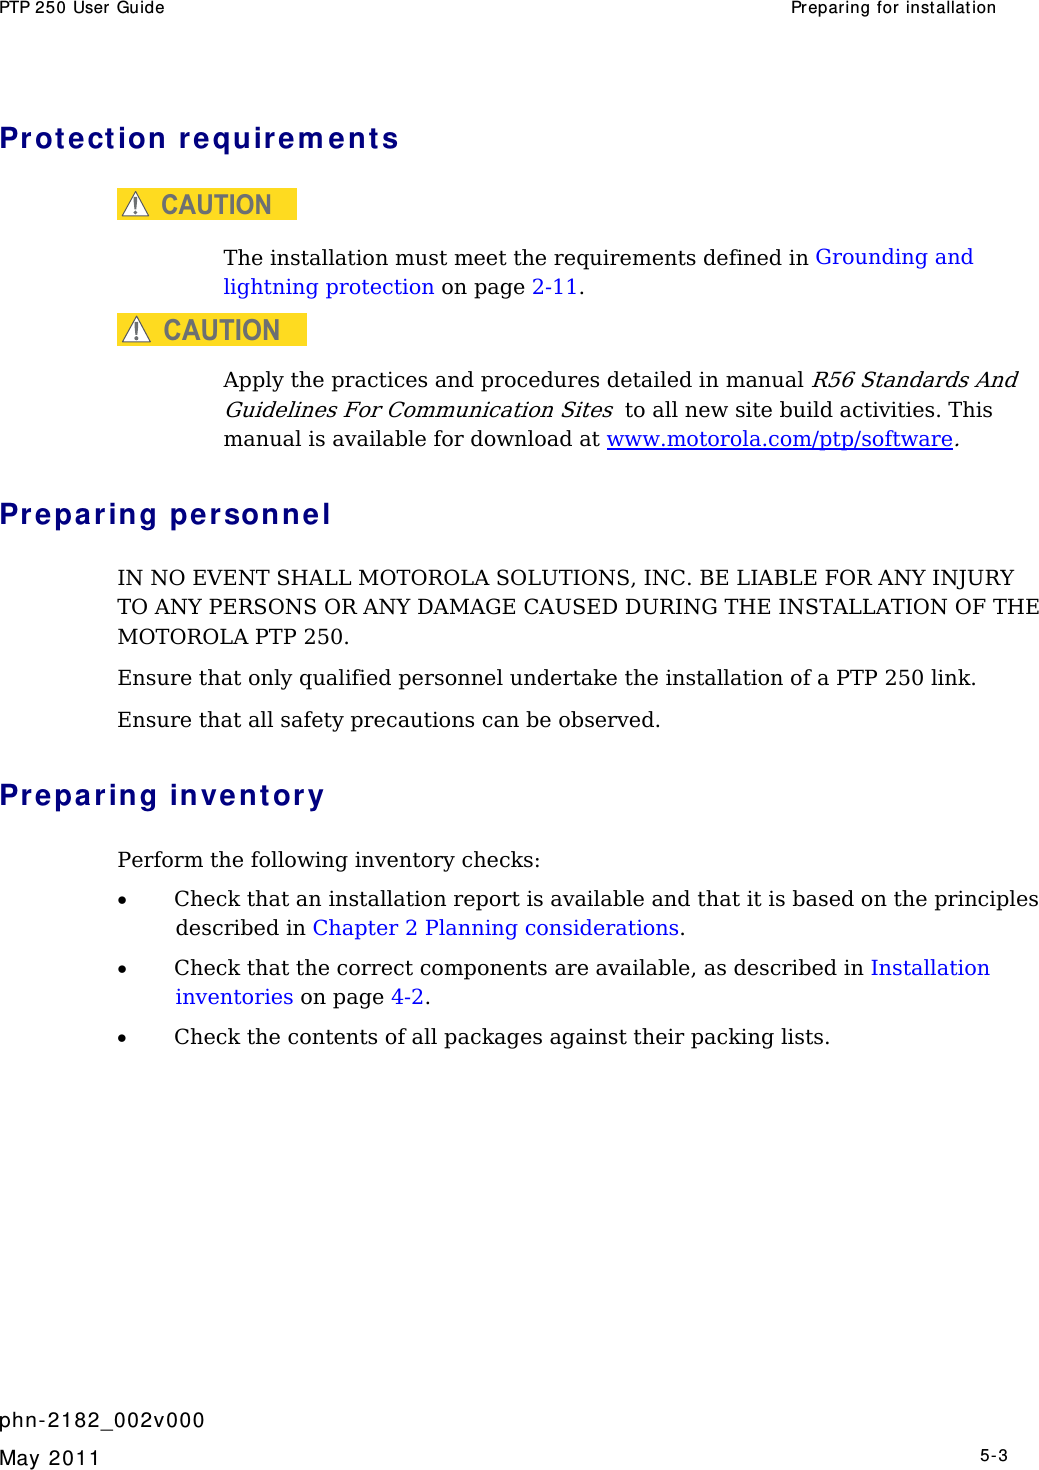 PTP 250 User Guide  Preparing for inst allation   phn- 2182_002v000   May 2011   5-3  Prot ection requir e m ent s CAUTION  The installation must meet the requirements defined in Grounding and lightning protection on page 2-11. CAUTION Apply the practices and procedures detailed in manual R56 Standards And Guidelines For Communication Sites  to all new site build activities. This manual is available for download at www.motorola.com/ptp/software. Preparing personnel IN NO EVENT SHALL MOTOROLA SOLUTIONS, INC. BE LIABLE FOR ANY INJURY TO ANY PERSONS OR ANY DAMAGE CAUSED DURING THE INSTALLATION OF THE MOTOROLA PTP 250. Ensure that only qualified personnel undertake the installation of a PTP 250 link. Ensure that all safety precautions can be observed.  Preparing invent ory Perform the following inventory checks:  • Check that an installation report is available and that it is based on the principles described in Chapter 2 Planning considerations. • Check that the correct components are available, as described in Installation inventories on page 4-2. • Check the contents of all packages against their packing lists.  